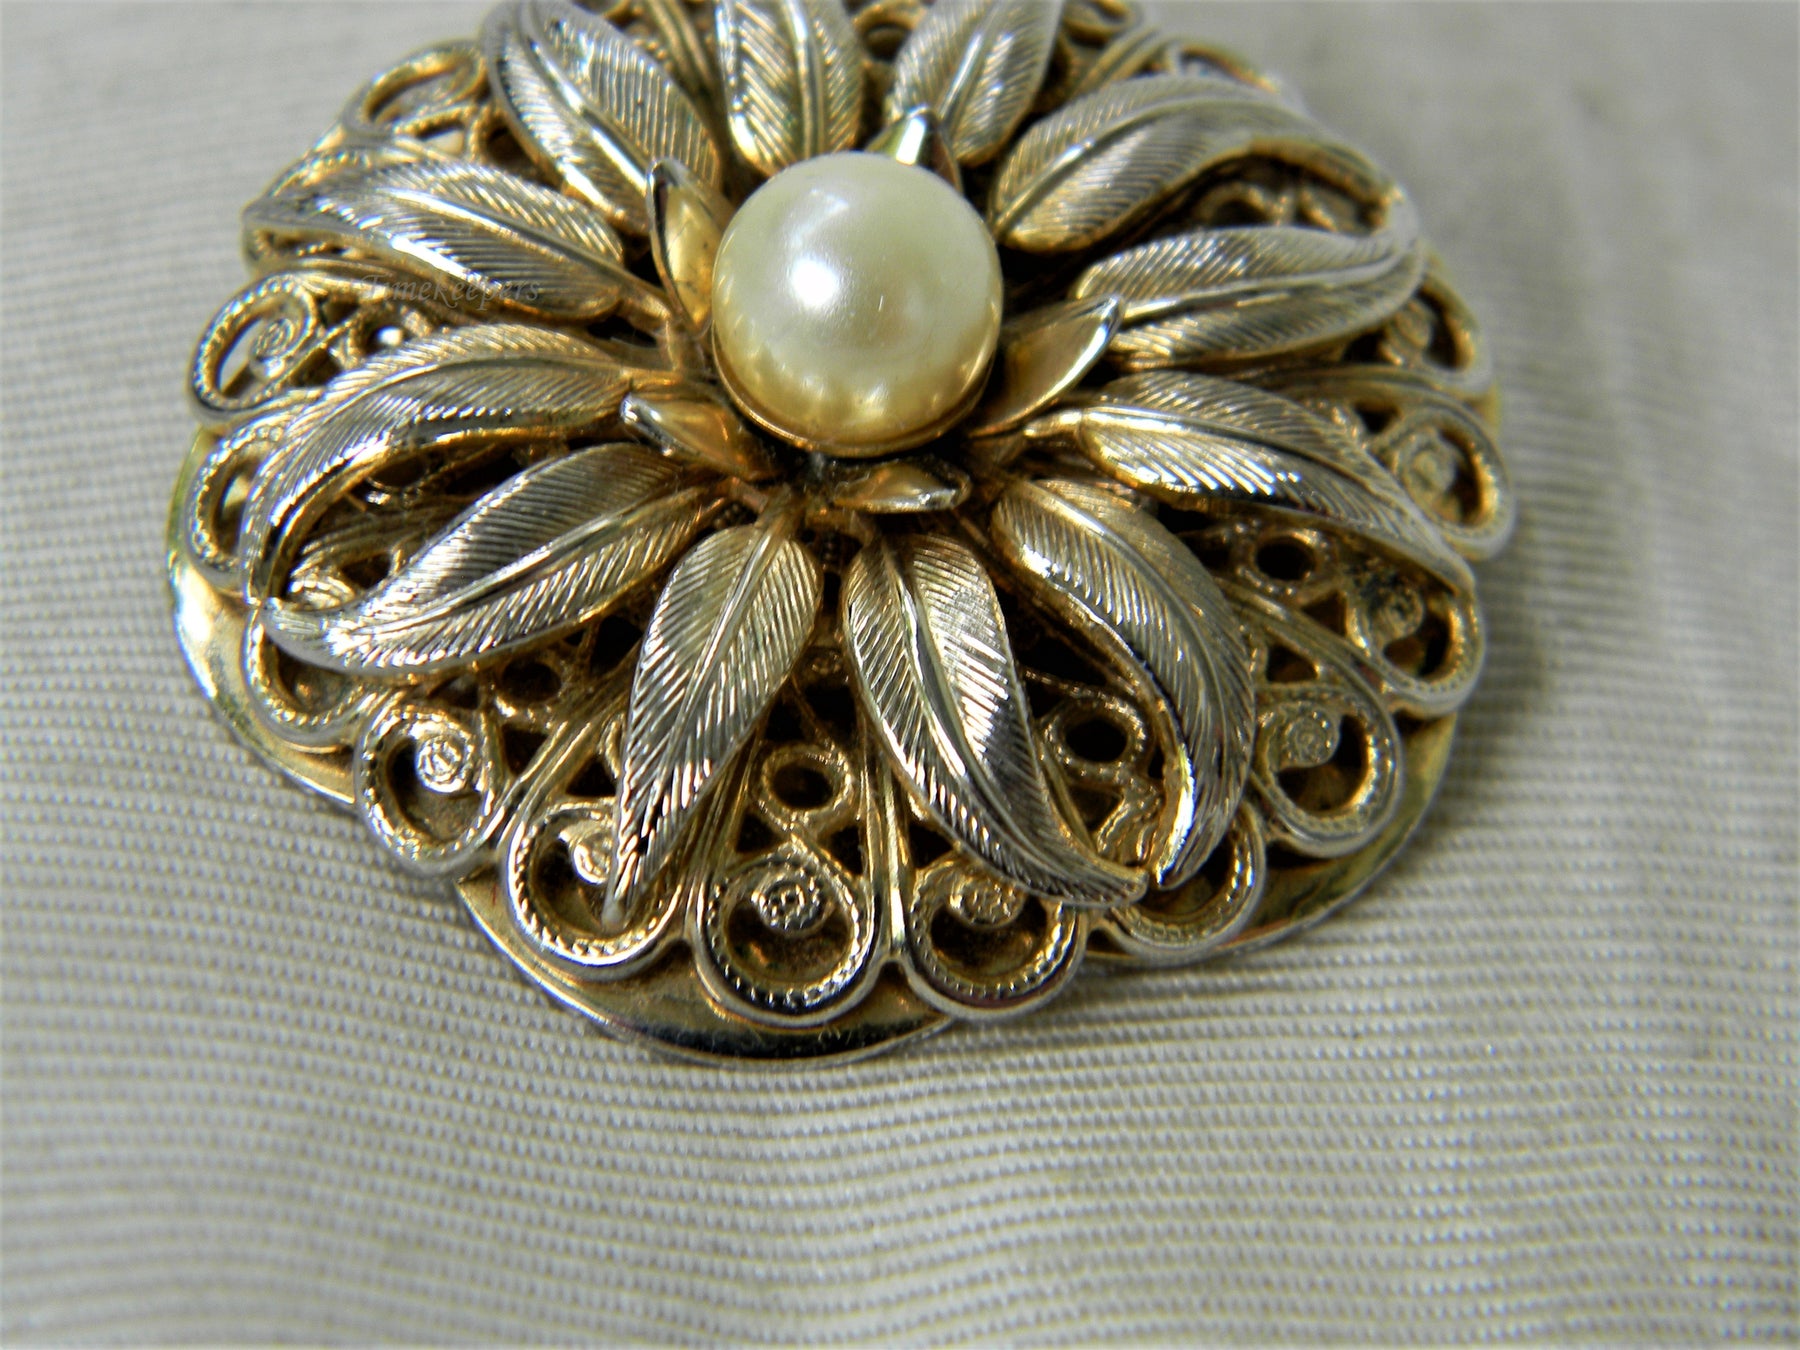 1pc Gold-tone Pearl Scarf Clip For Women